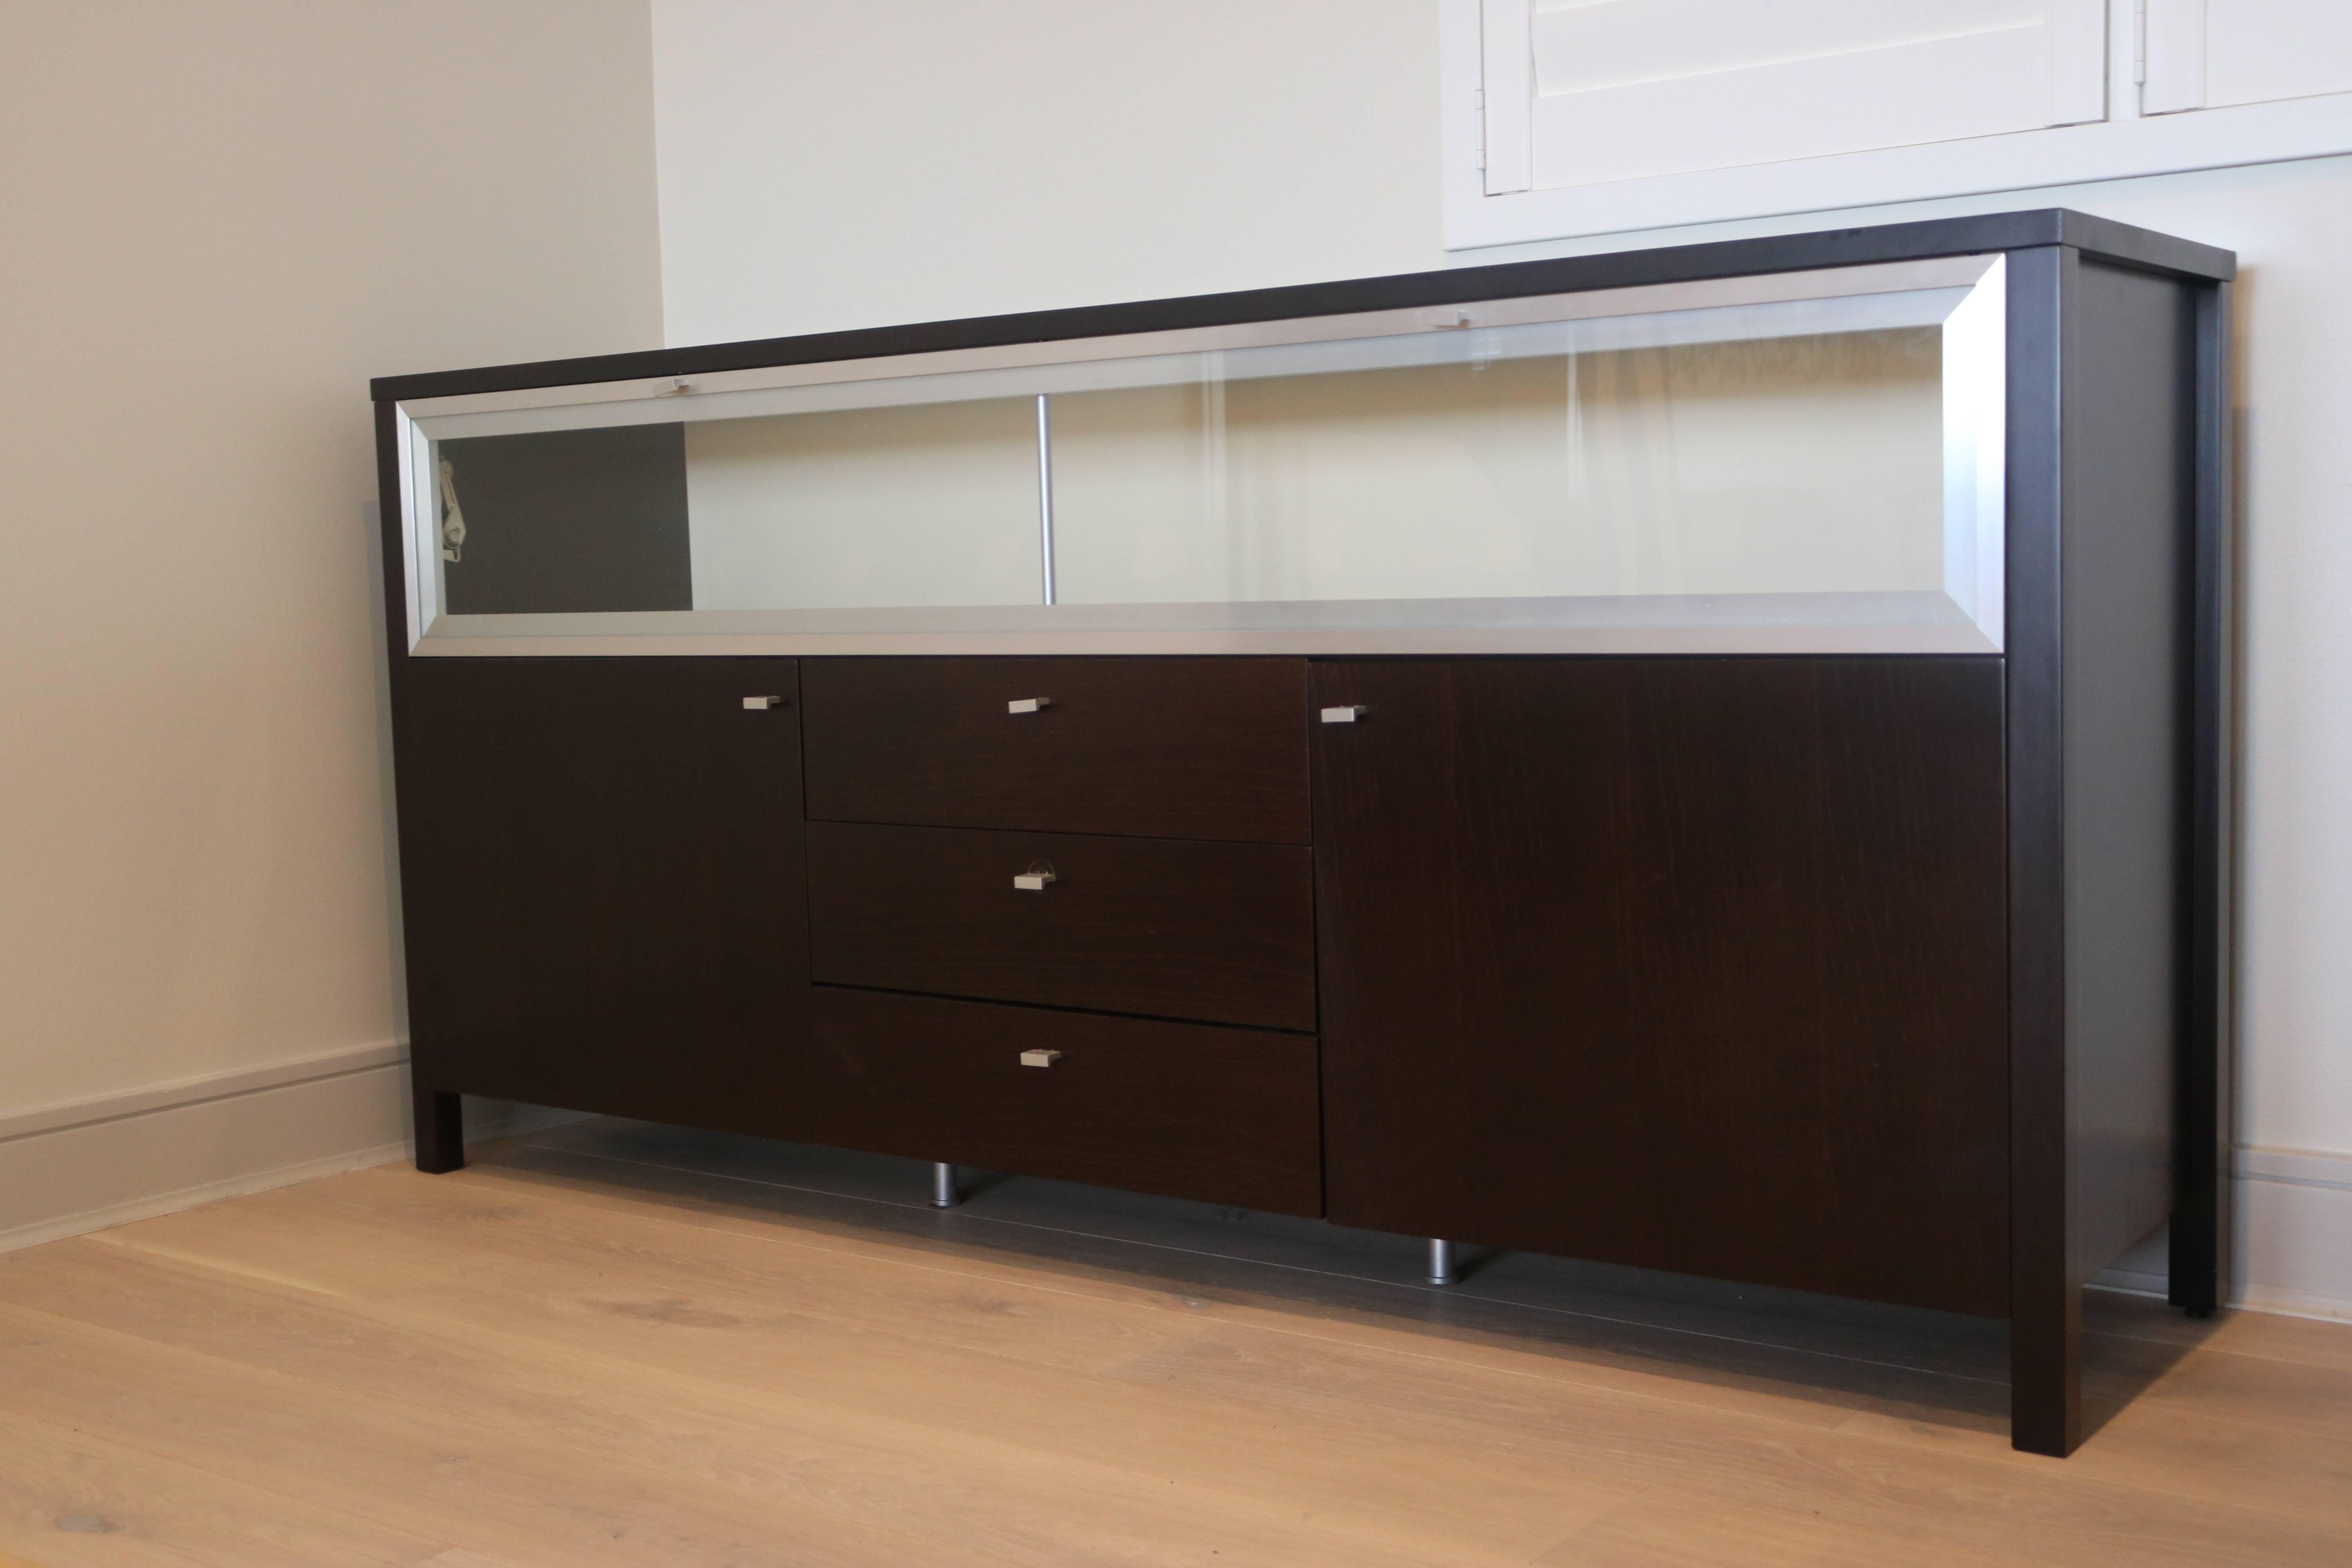 IT'S AN AMAZING VALUE FOR THIS STYLISH CABINET.
20th Century 1980s Sleek Modern Art Deco Style Glass Wood  Cabinet buffet credenza  sideboard Bar or Dresser in ebonized black full finished Stained wood with chrome metal trim and hardware.
Top is